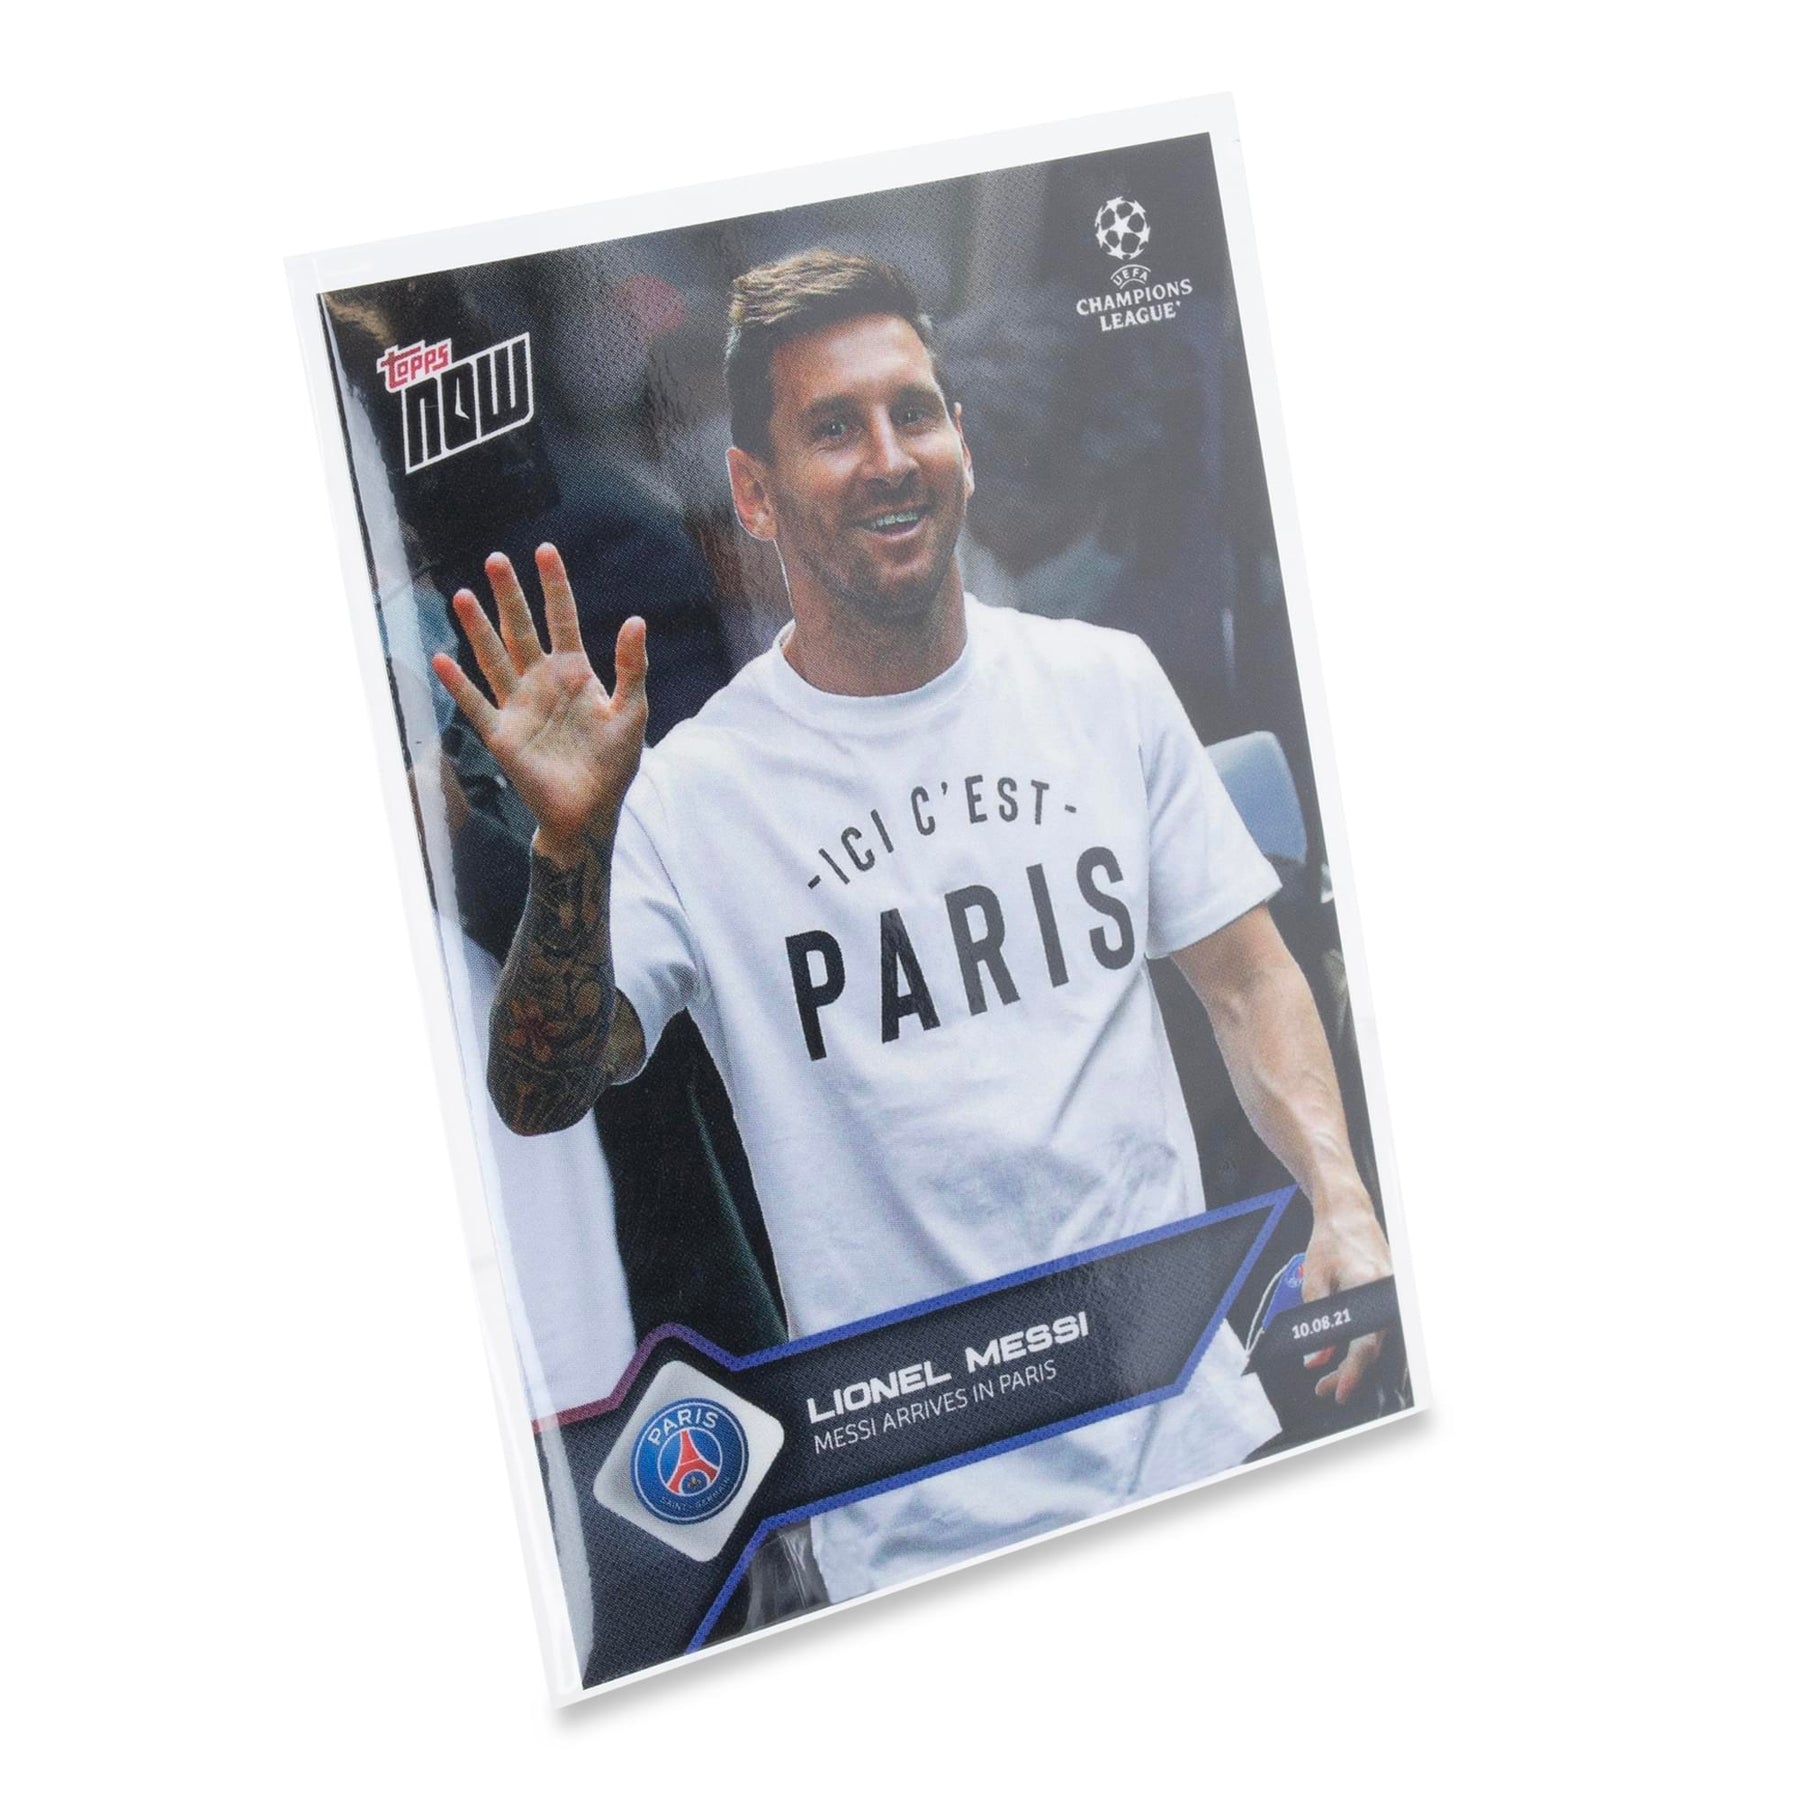 UCL TOPPS NOW Card #11 | Messi Arrives in Paris